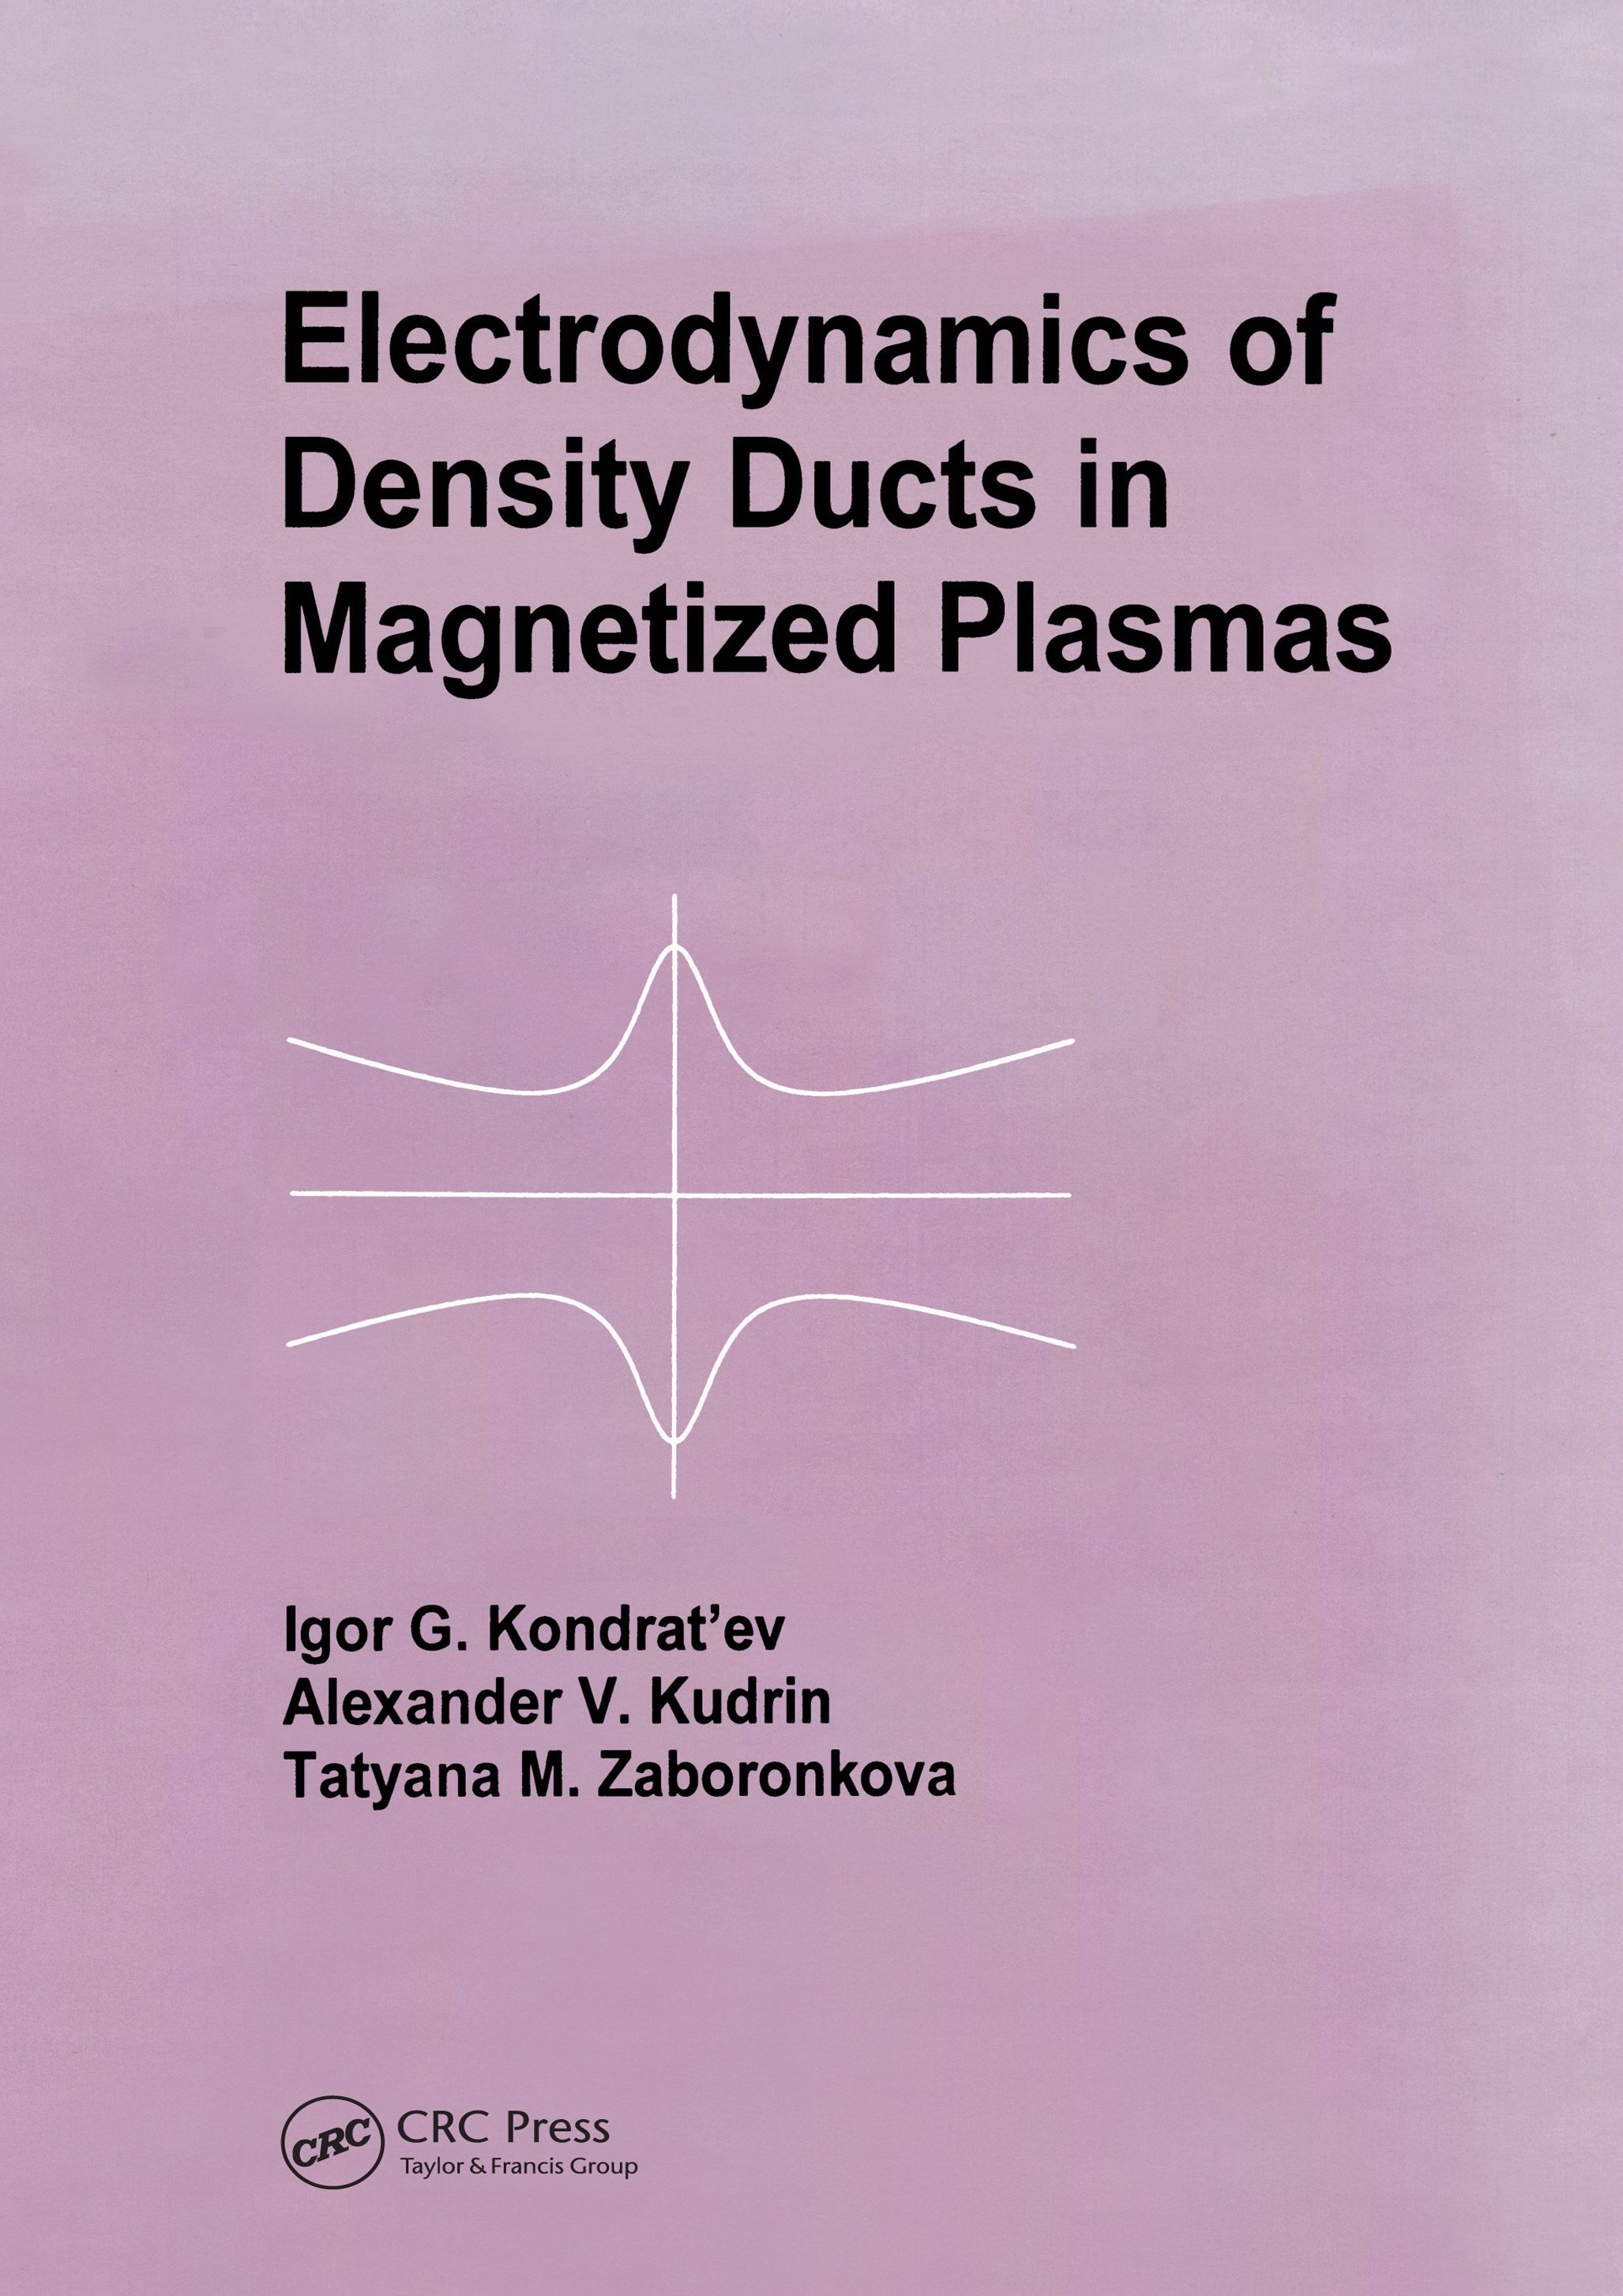 Electrodynamics of Density Ducts in Magnetized Plasmas - >100